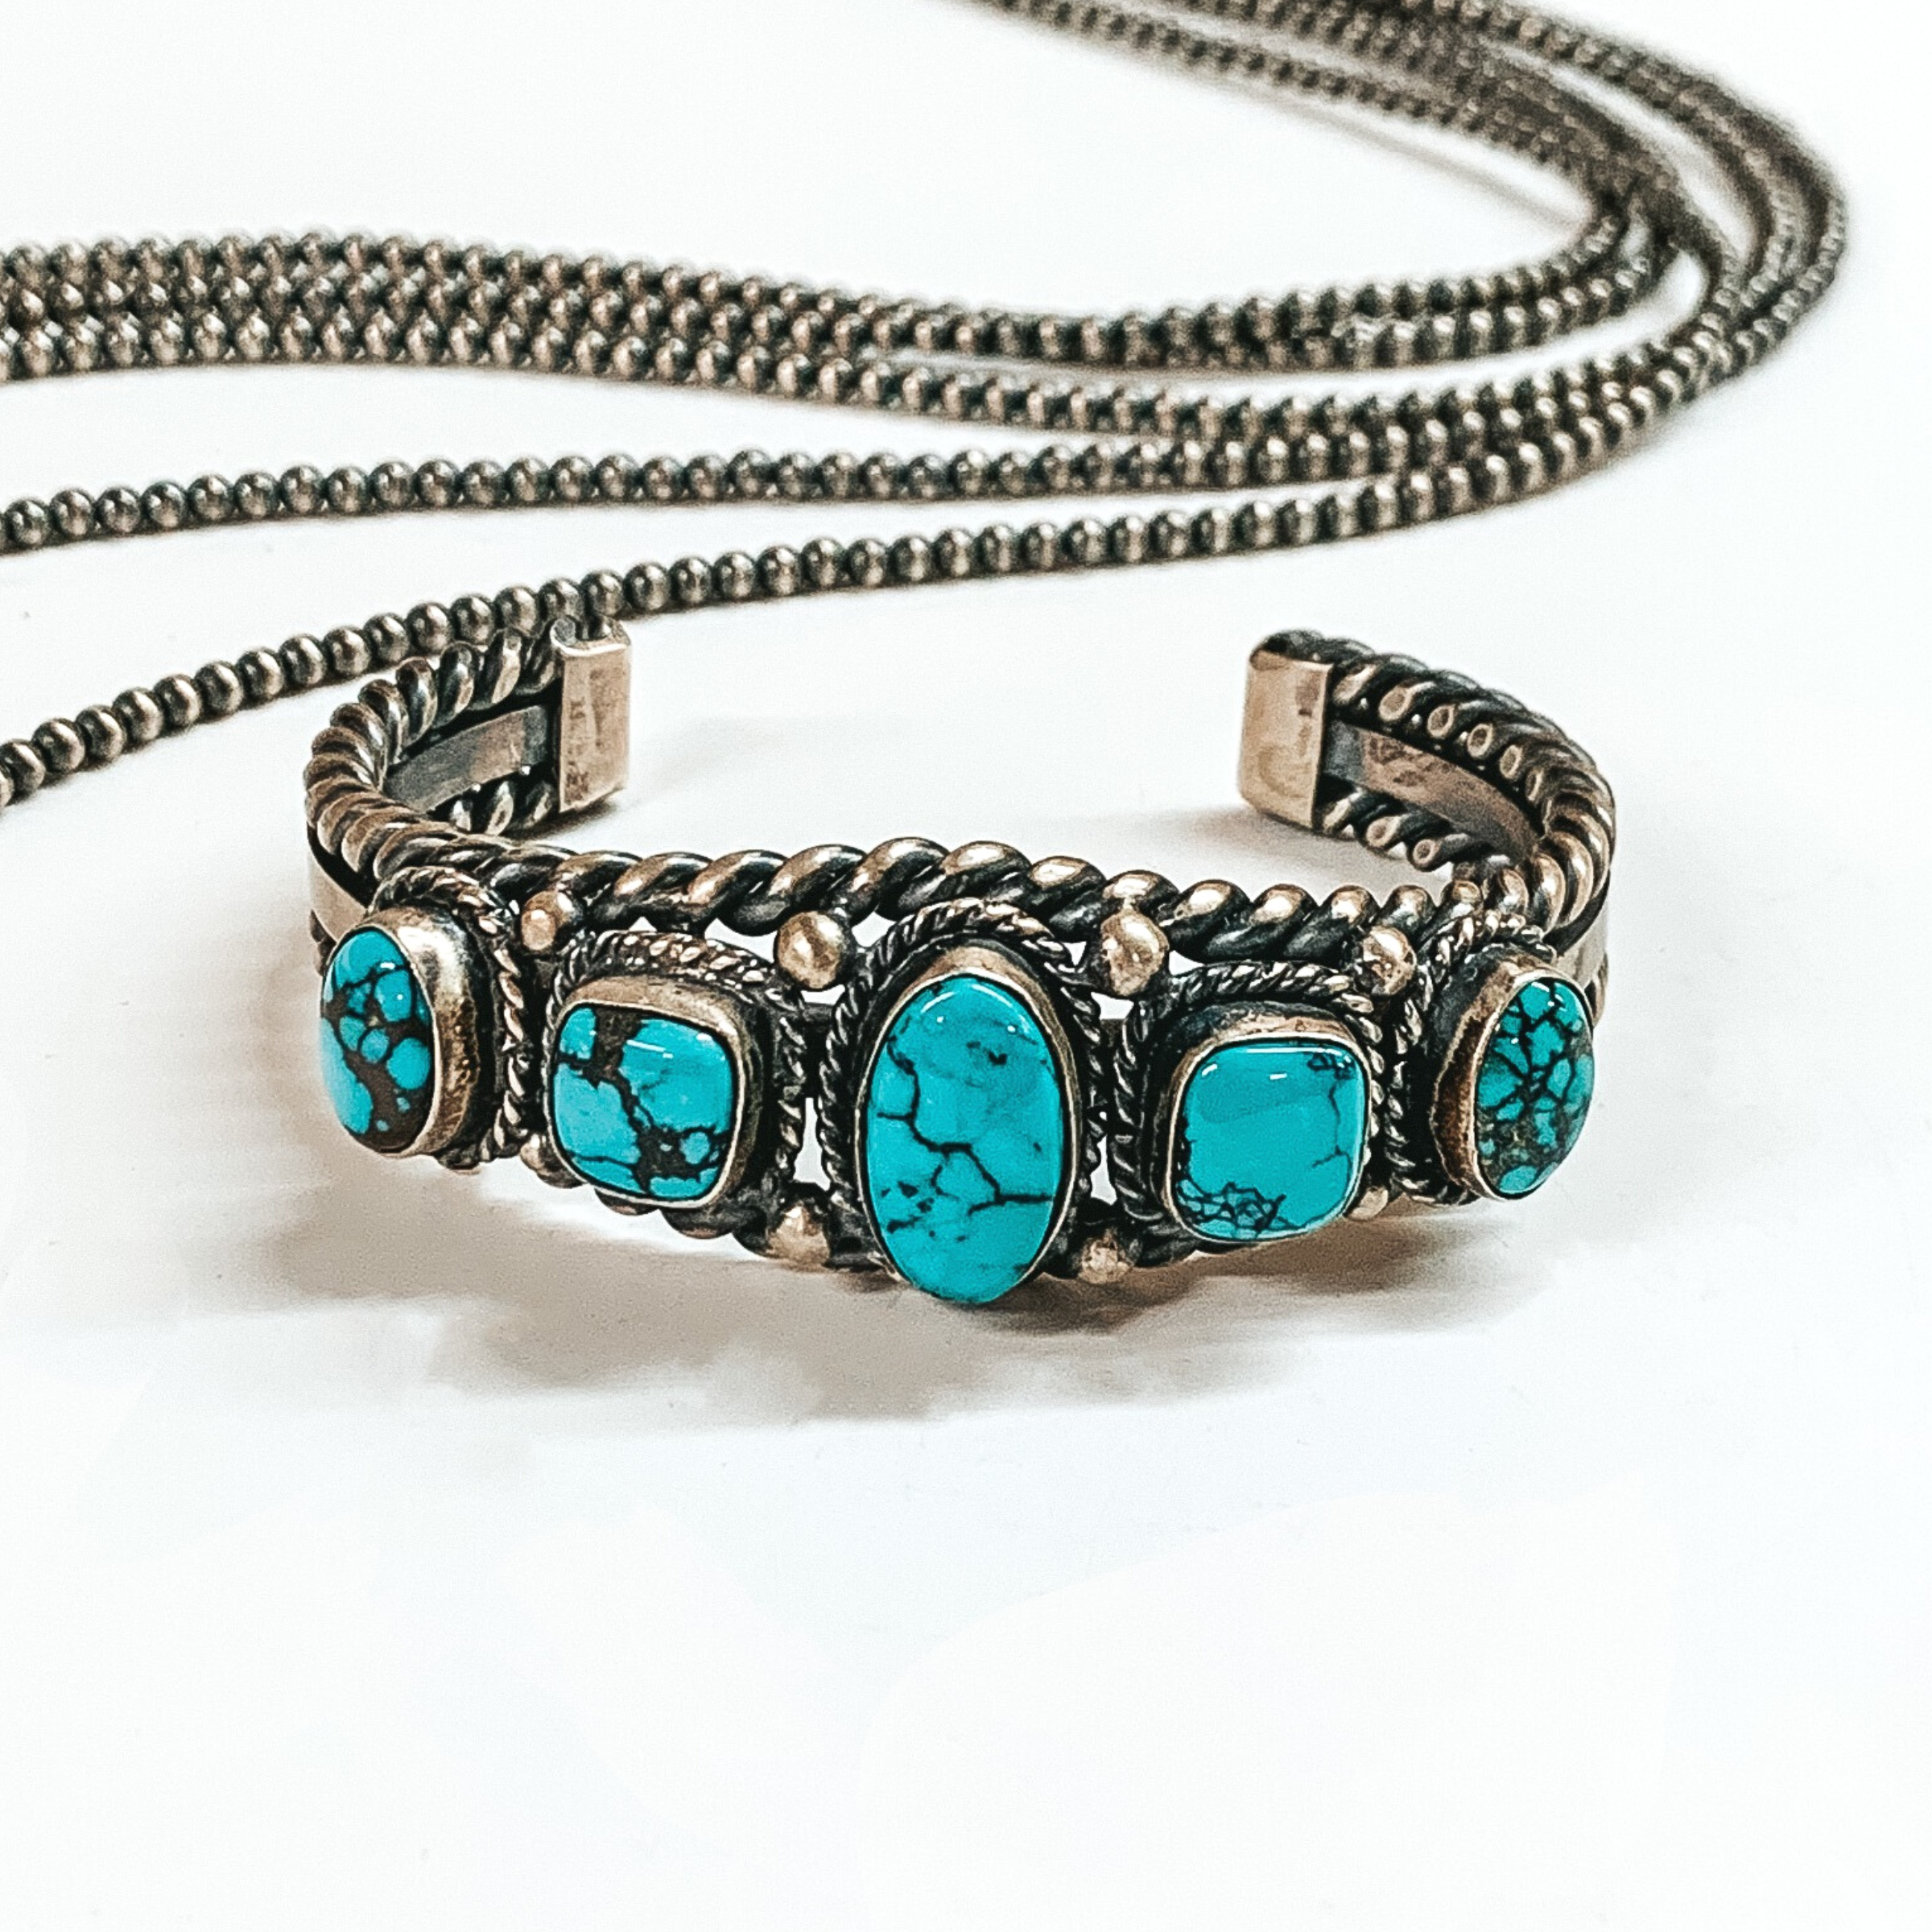 Silver cuff bracelet with a twisted rope outline and five turquoise stones. These bracelets are pictured on a white background with silver beads behind it. 